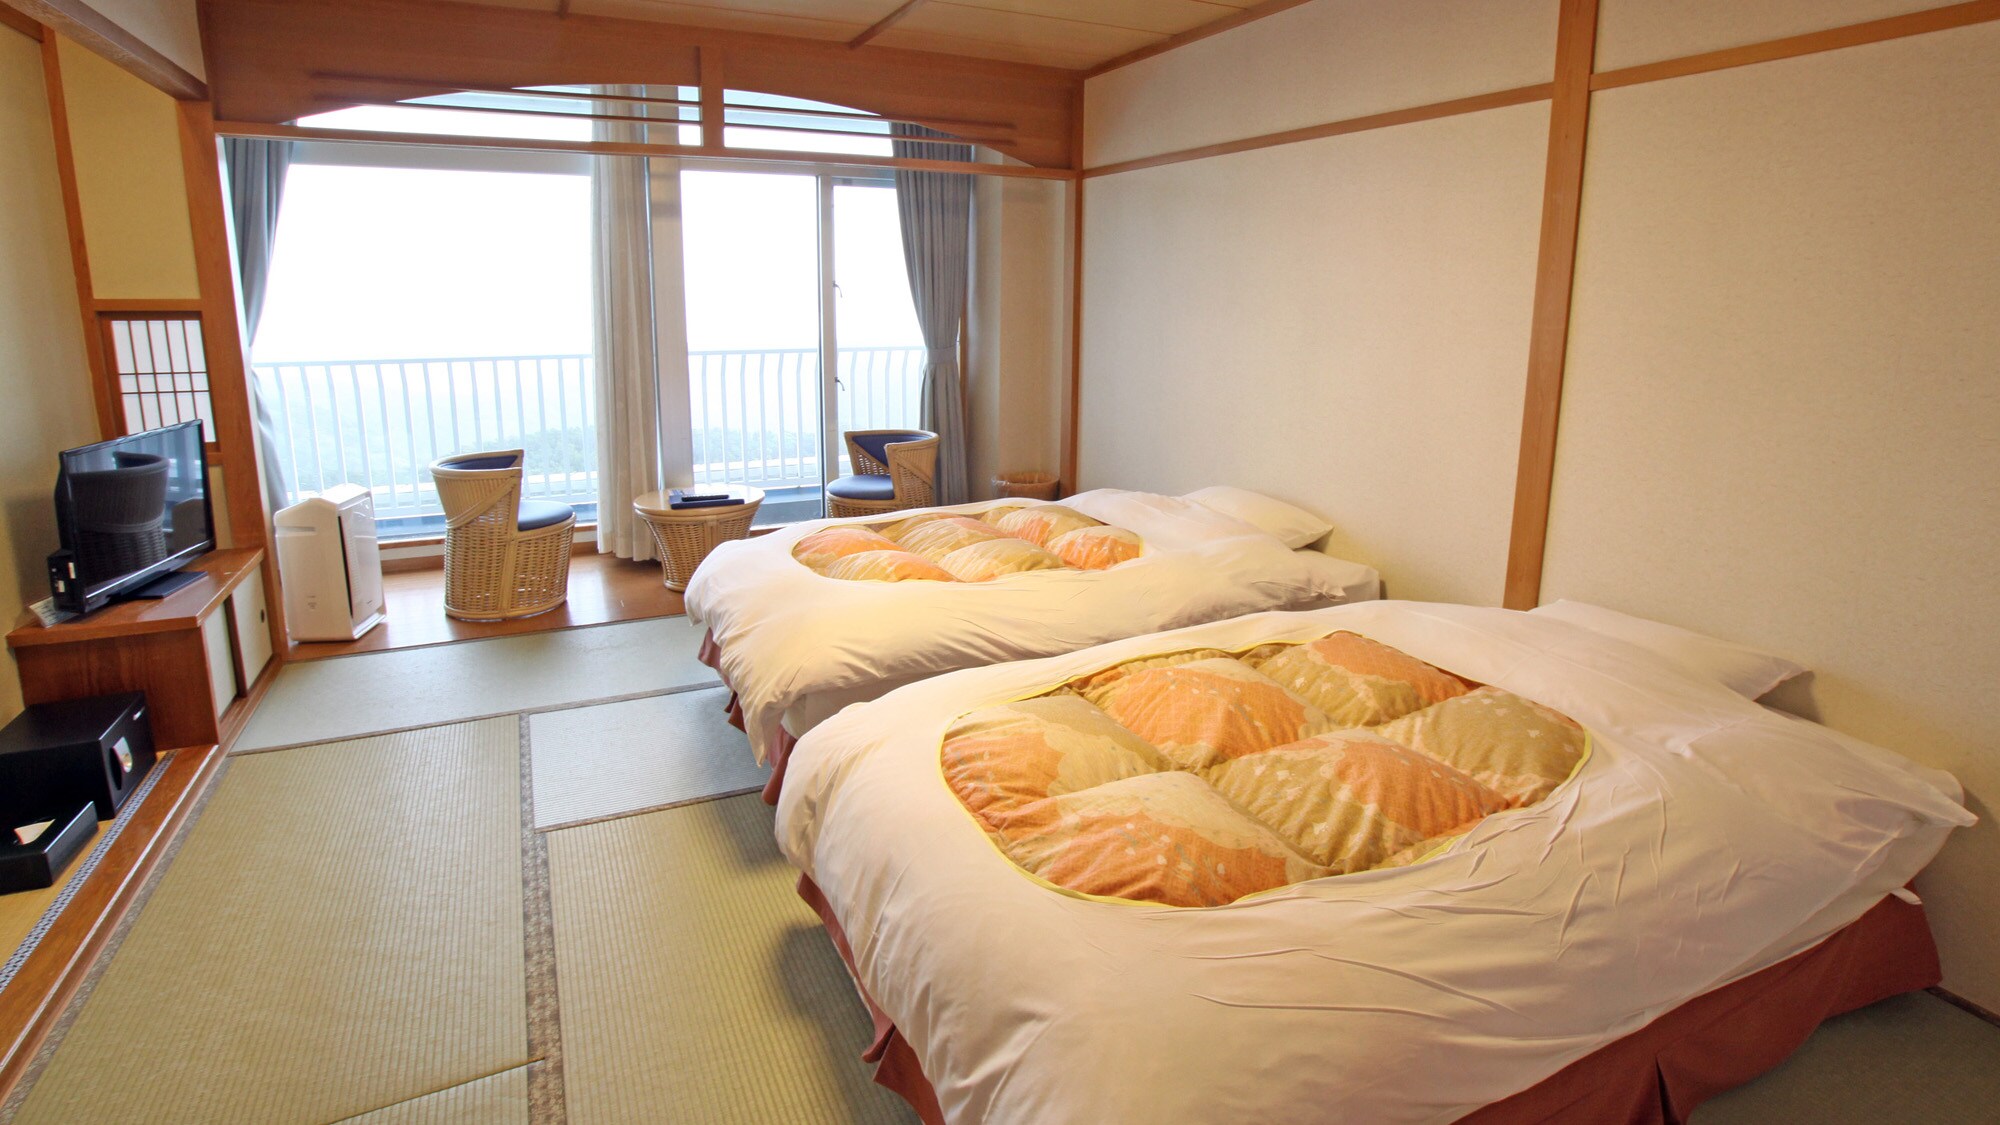 3 Japanese-style rooms + 2 bedrooms